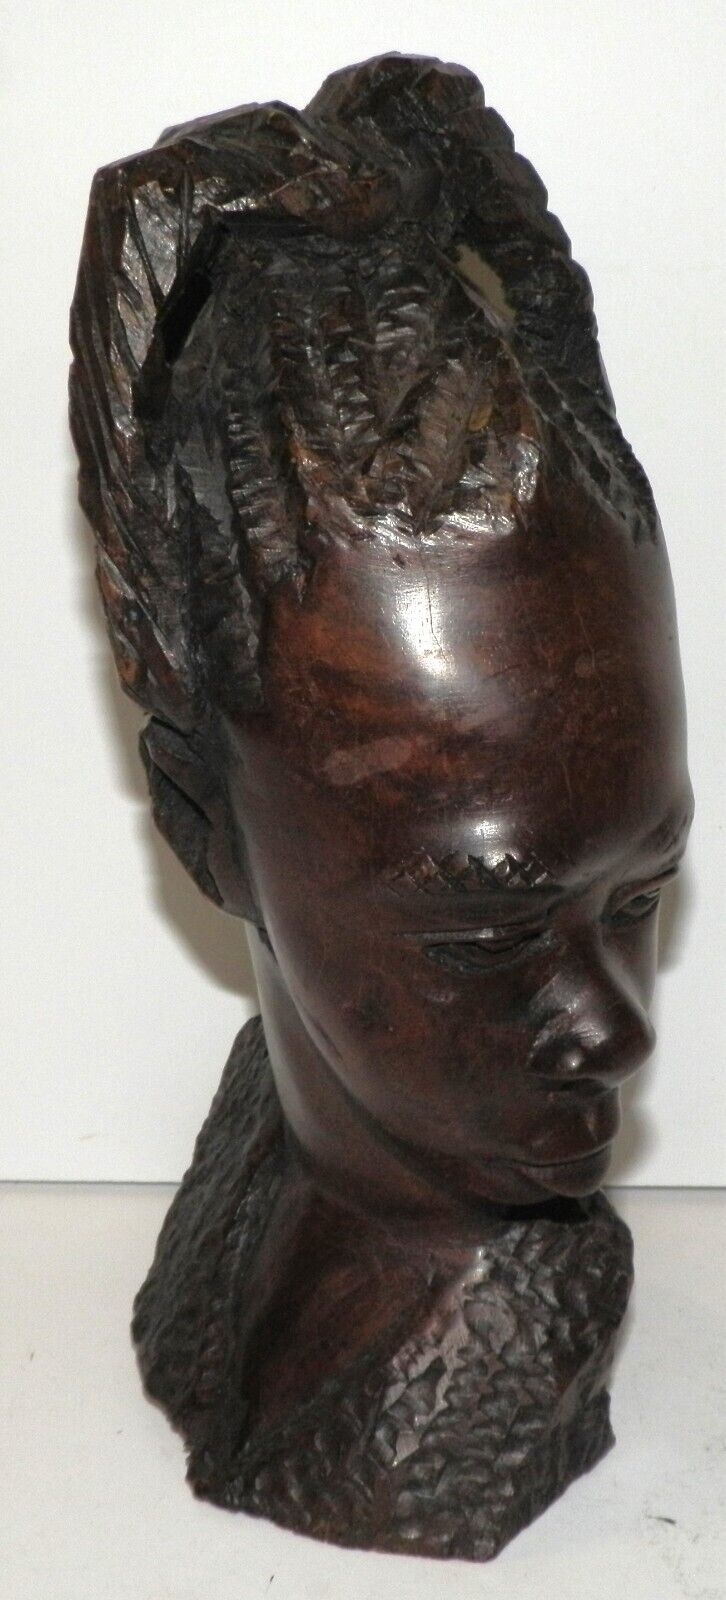 Mid 20th Century Hand Carved ~ Young Tribal Women ~ Bust Sculpture 9.5